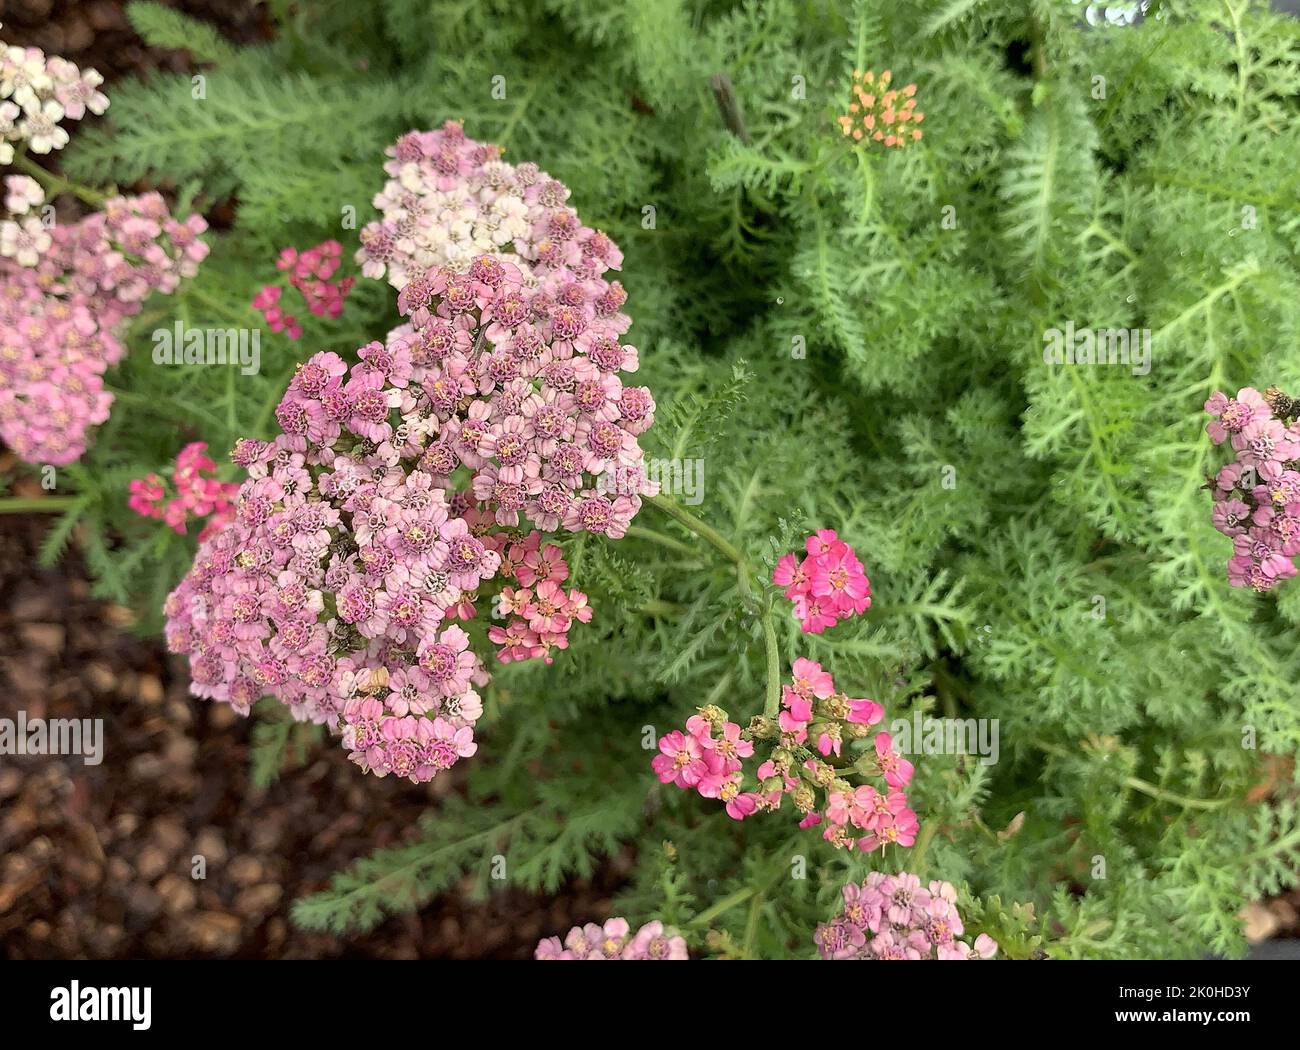 Close up of the flowers and leaves of the herbaceous perennial Achillea millefolium Cerise Queen plant seen in the garden in the UK in summer. Stock Photo